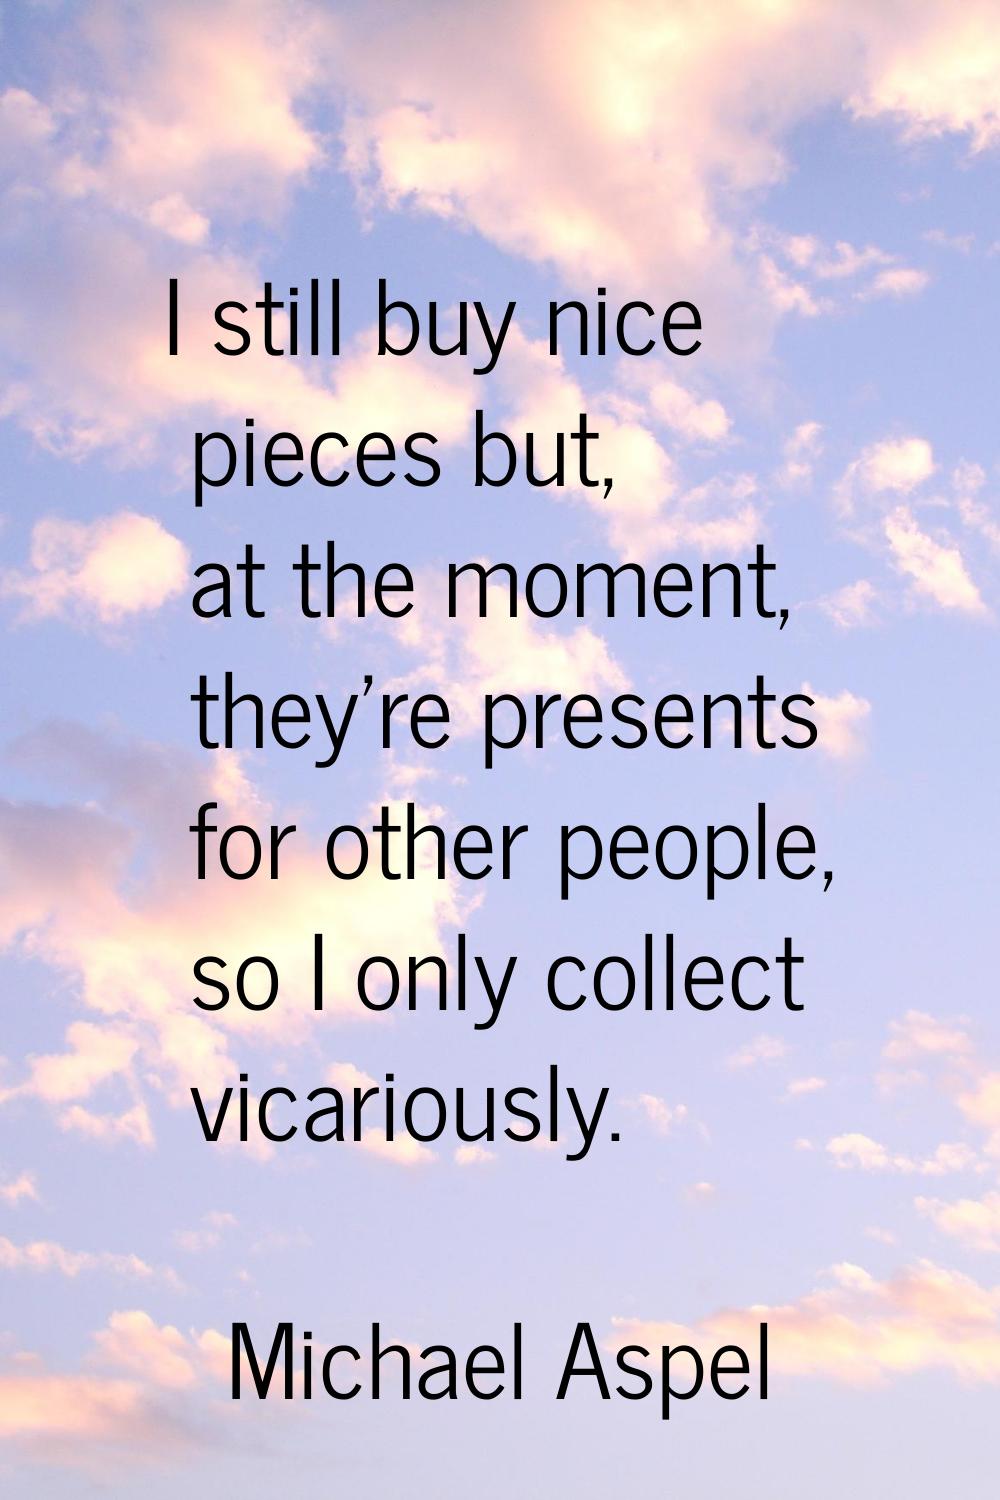 I still buy nice pieces but, at the moment, they're presents for other people, so I only collect vi